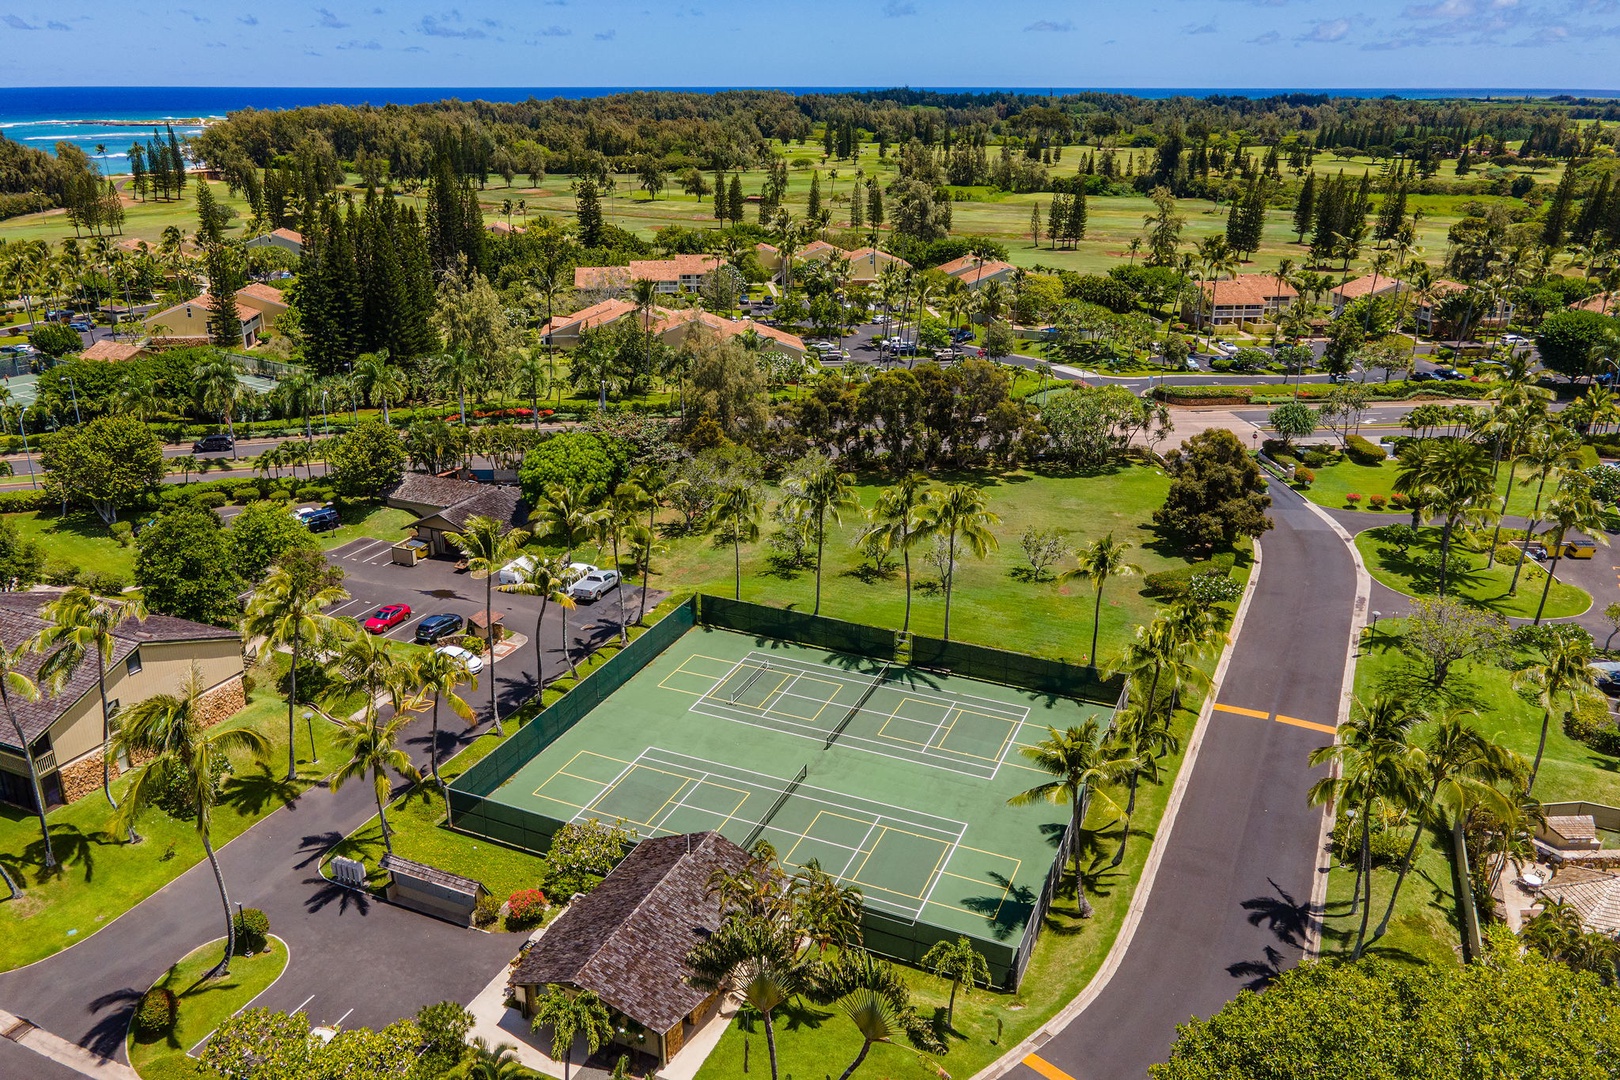 Kahuku Vacation Rentals, Turtle Bay's Kuilima Estates West #104 - Challenge your family or friends to a match at the community tennis courts